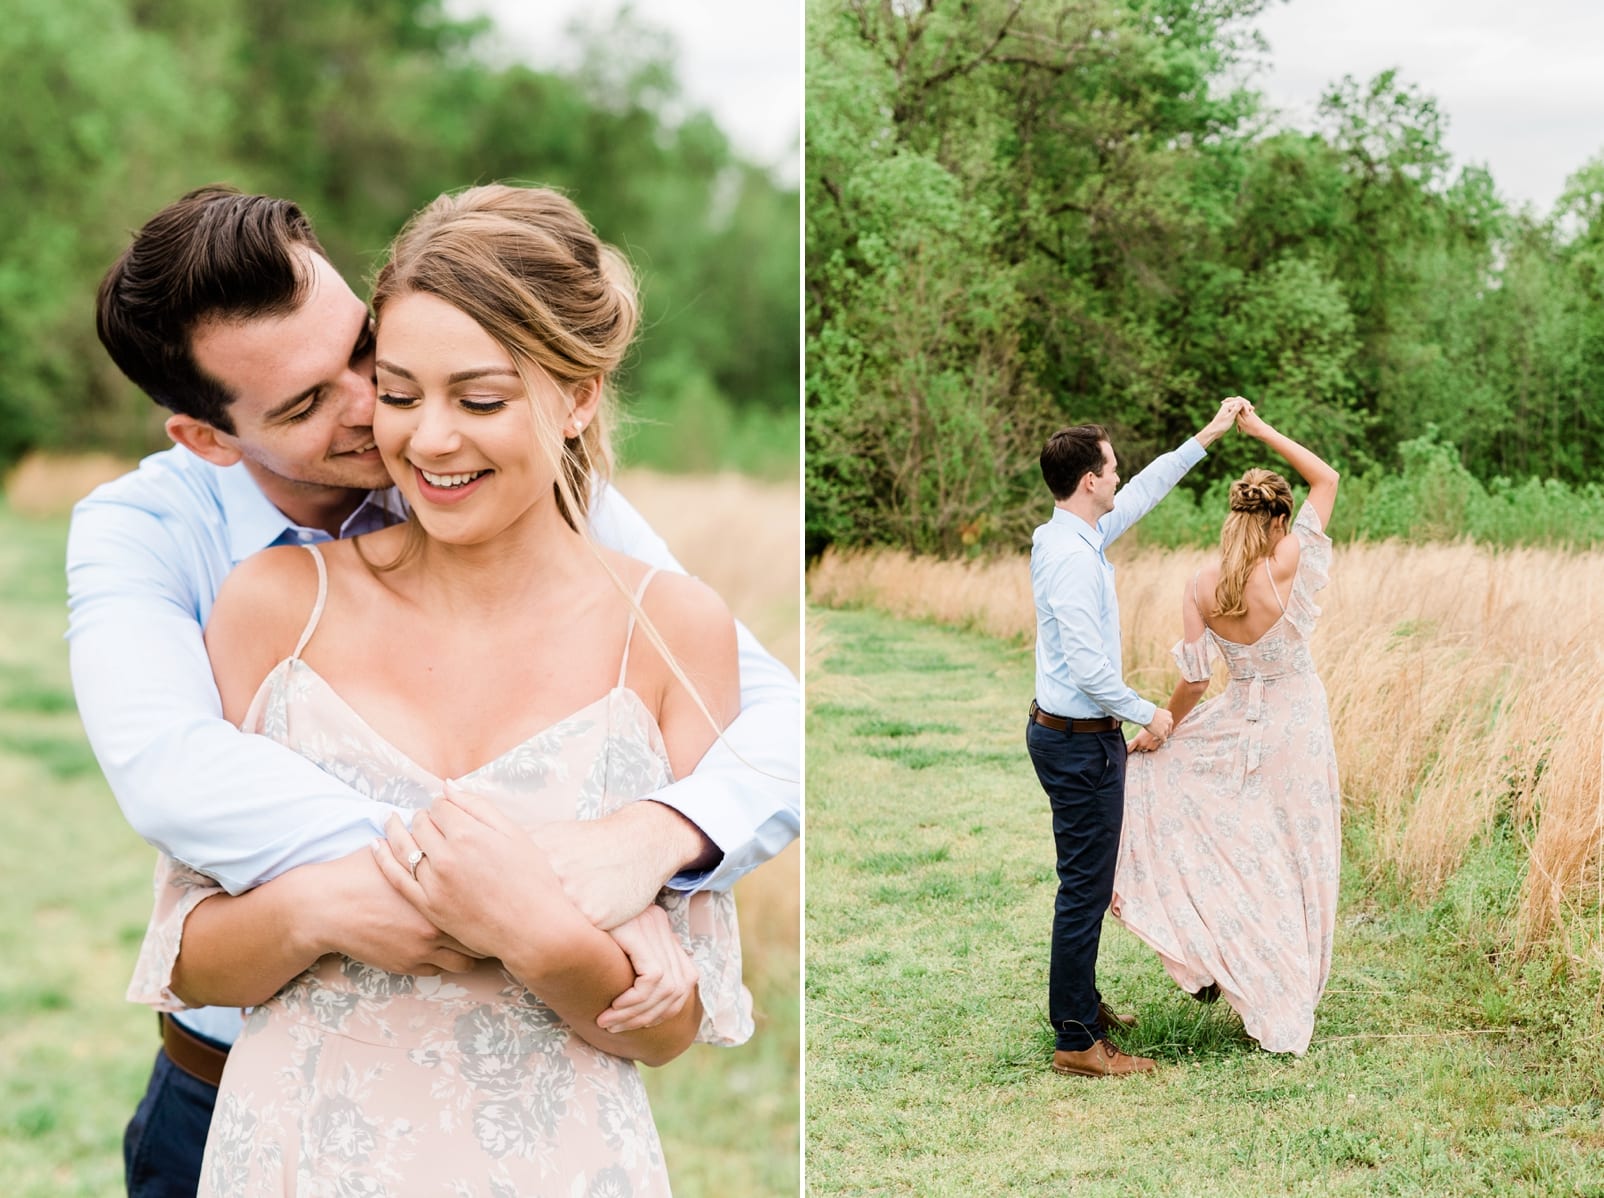 Spring engagement with groom twirling her around down a grass path photo